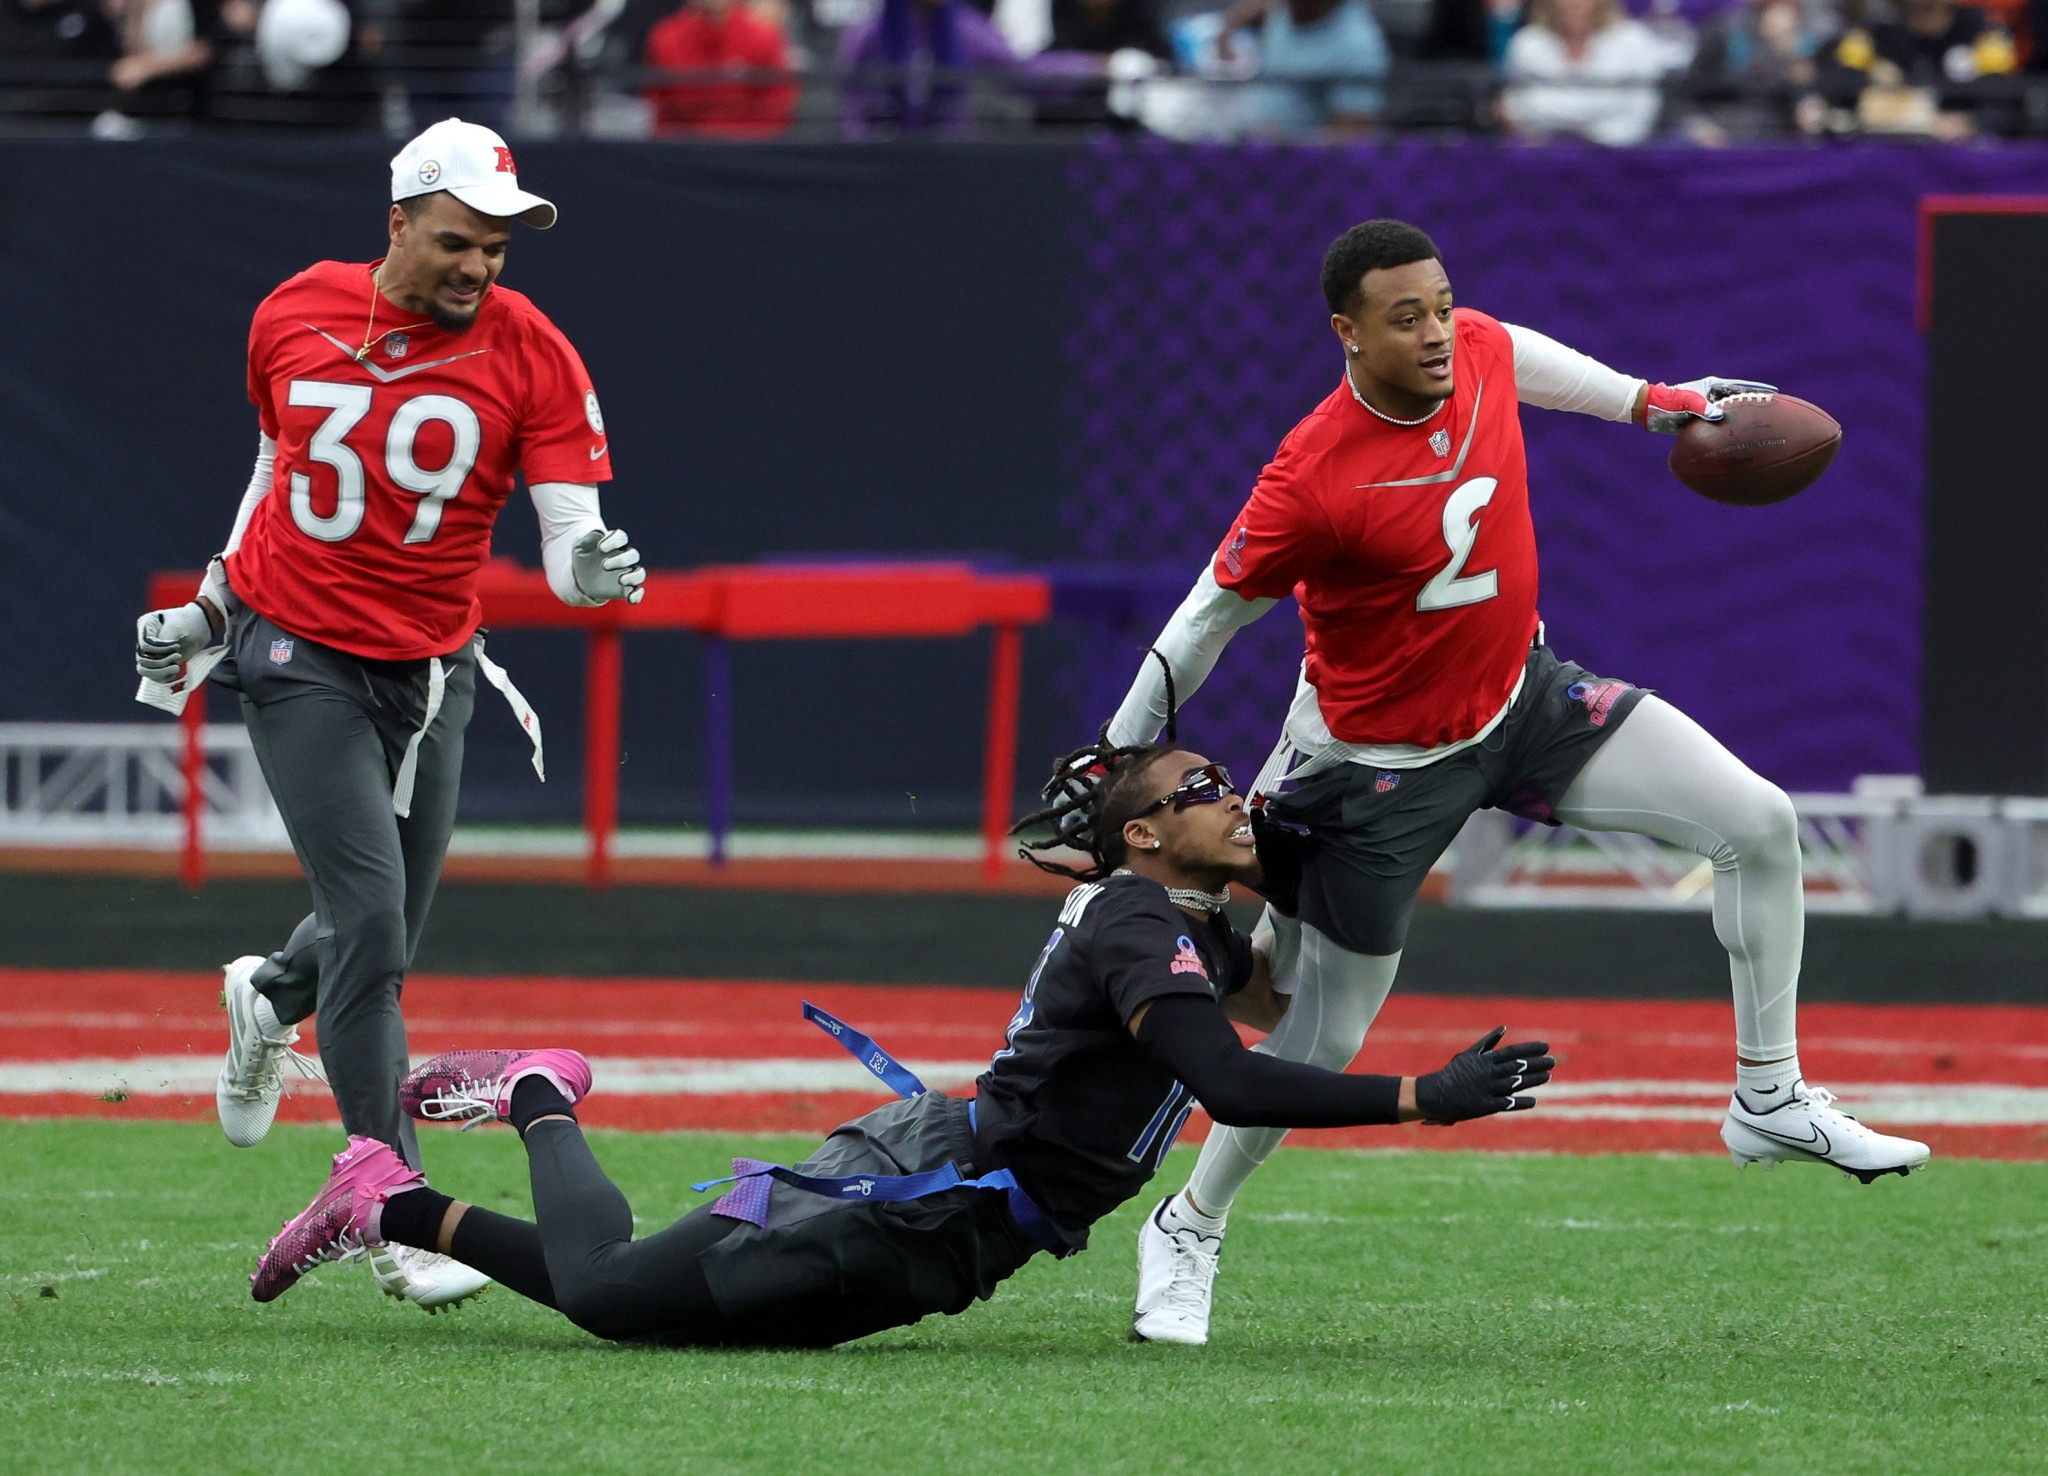 Flag football was contested when all-star teams from National Football Conference and American Football Conference went head to head ©Getty Images